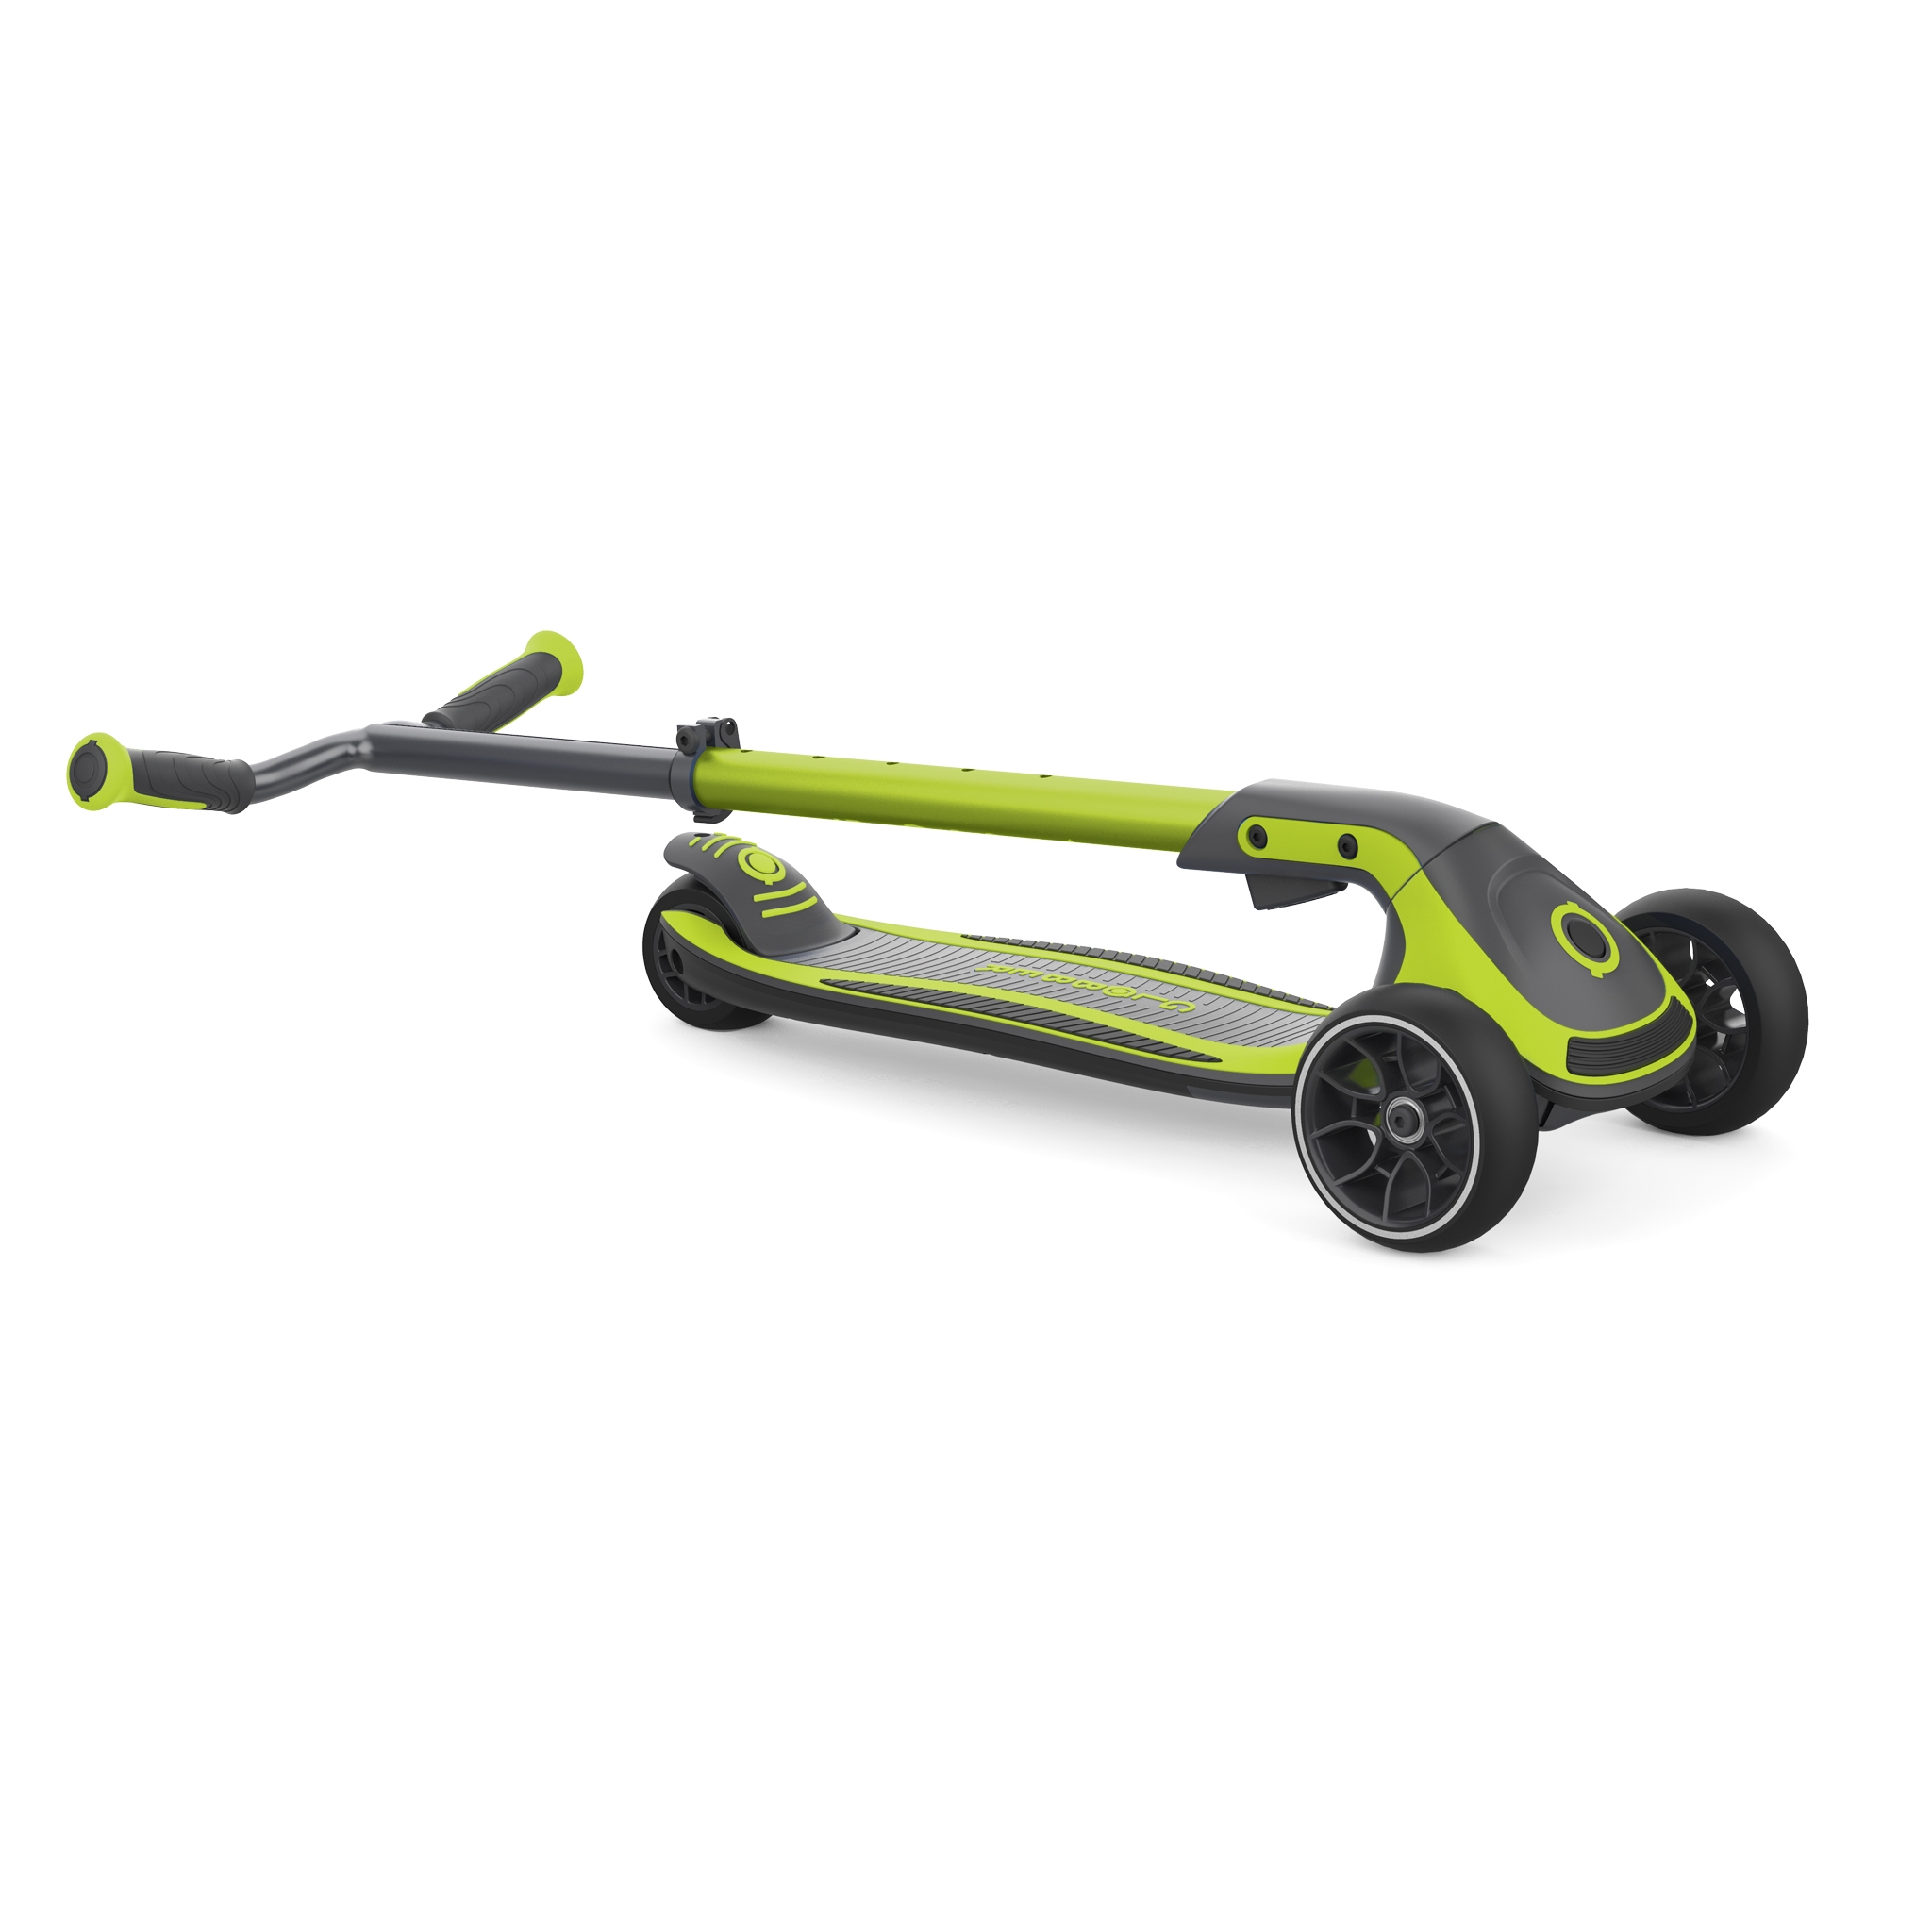 3 wheel foldable scooter for kids, teens and adults - Globber ULTIMUM 4